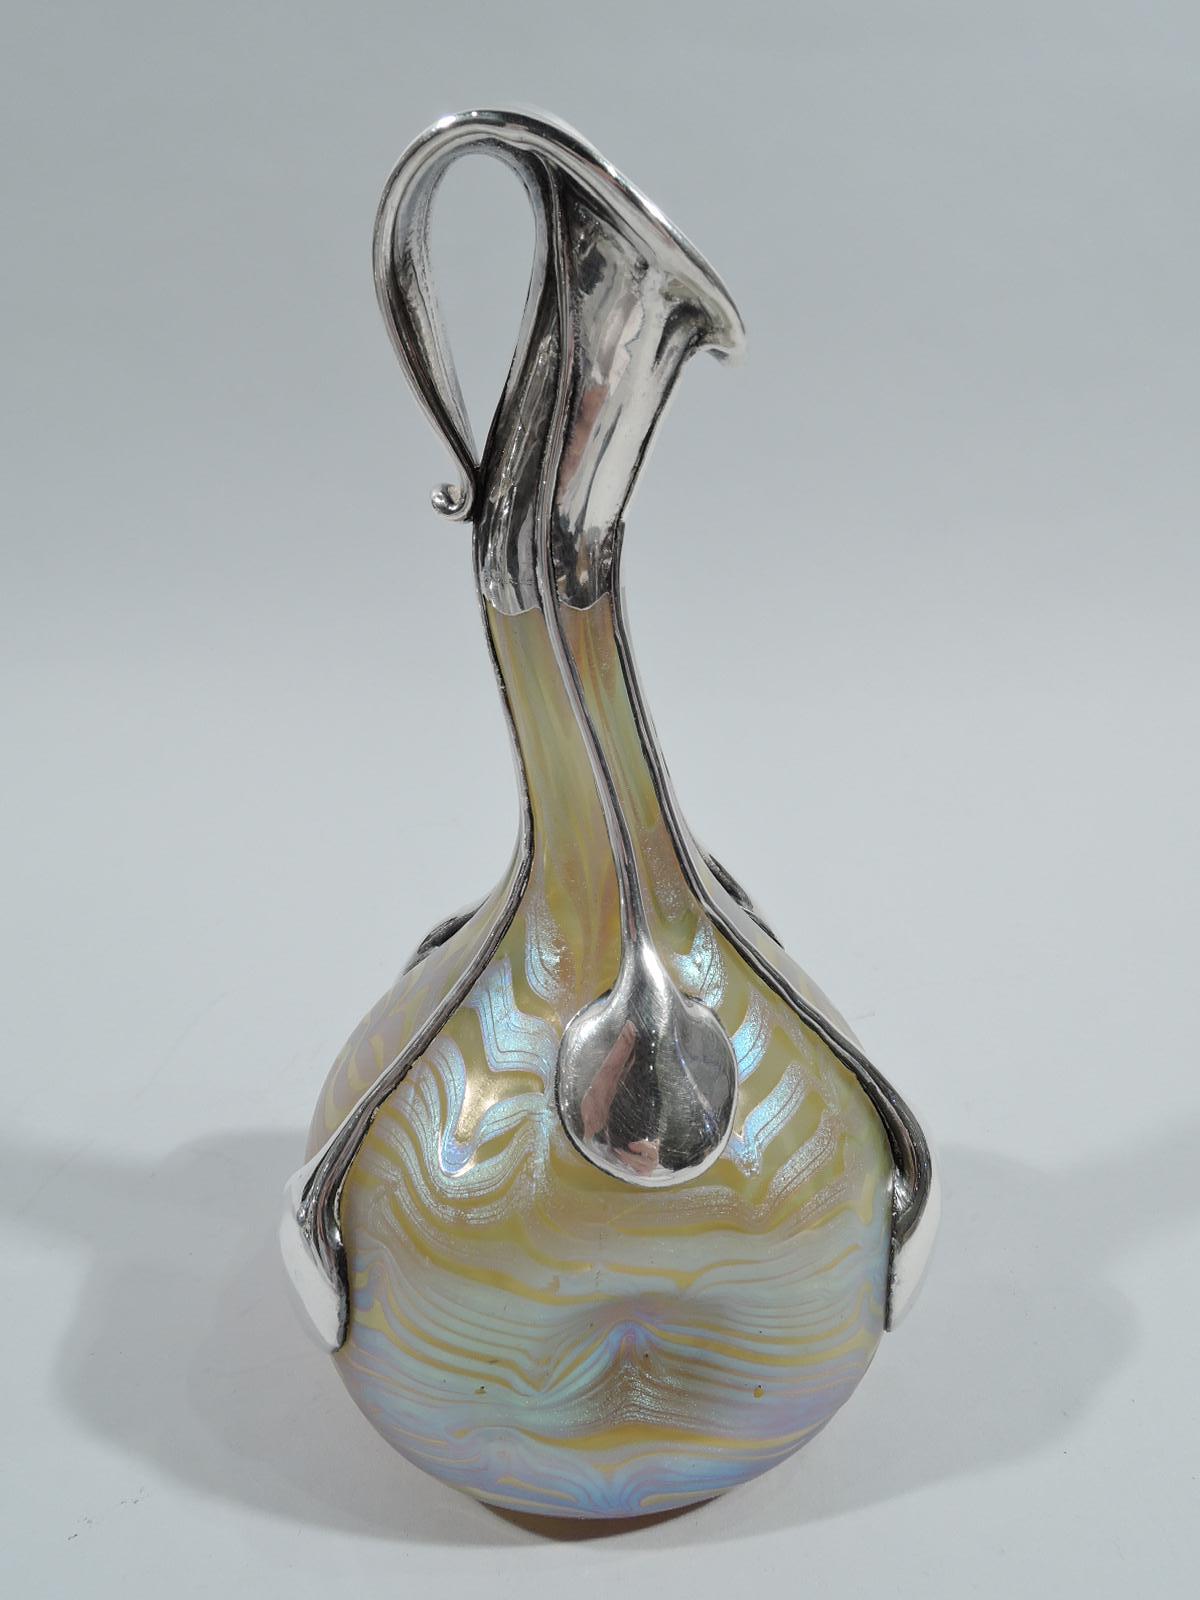 Turn-of-the-century Art Nouveau glass vase by historic maker Loetz with silver overlay. Pinched and globular bowl with curved cylindrical neck. Mouth has silver mount suggestive of a calla lily. Silver drip tendrils terminating in teardrops. Glass